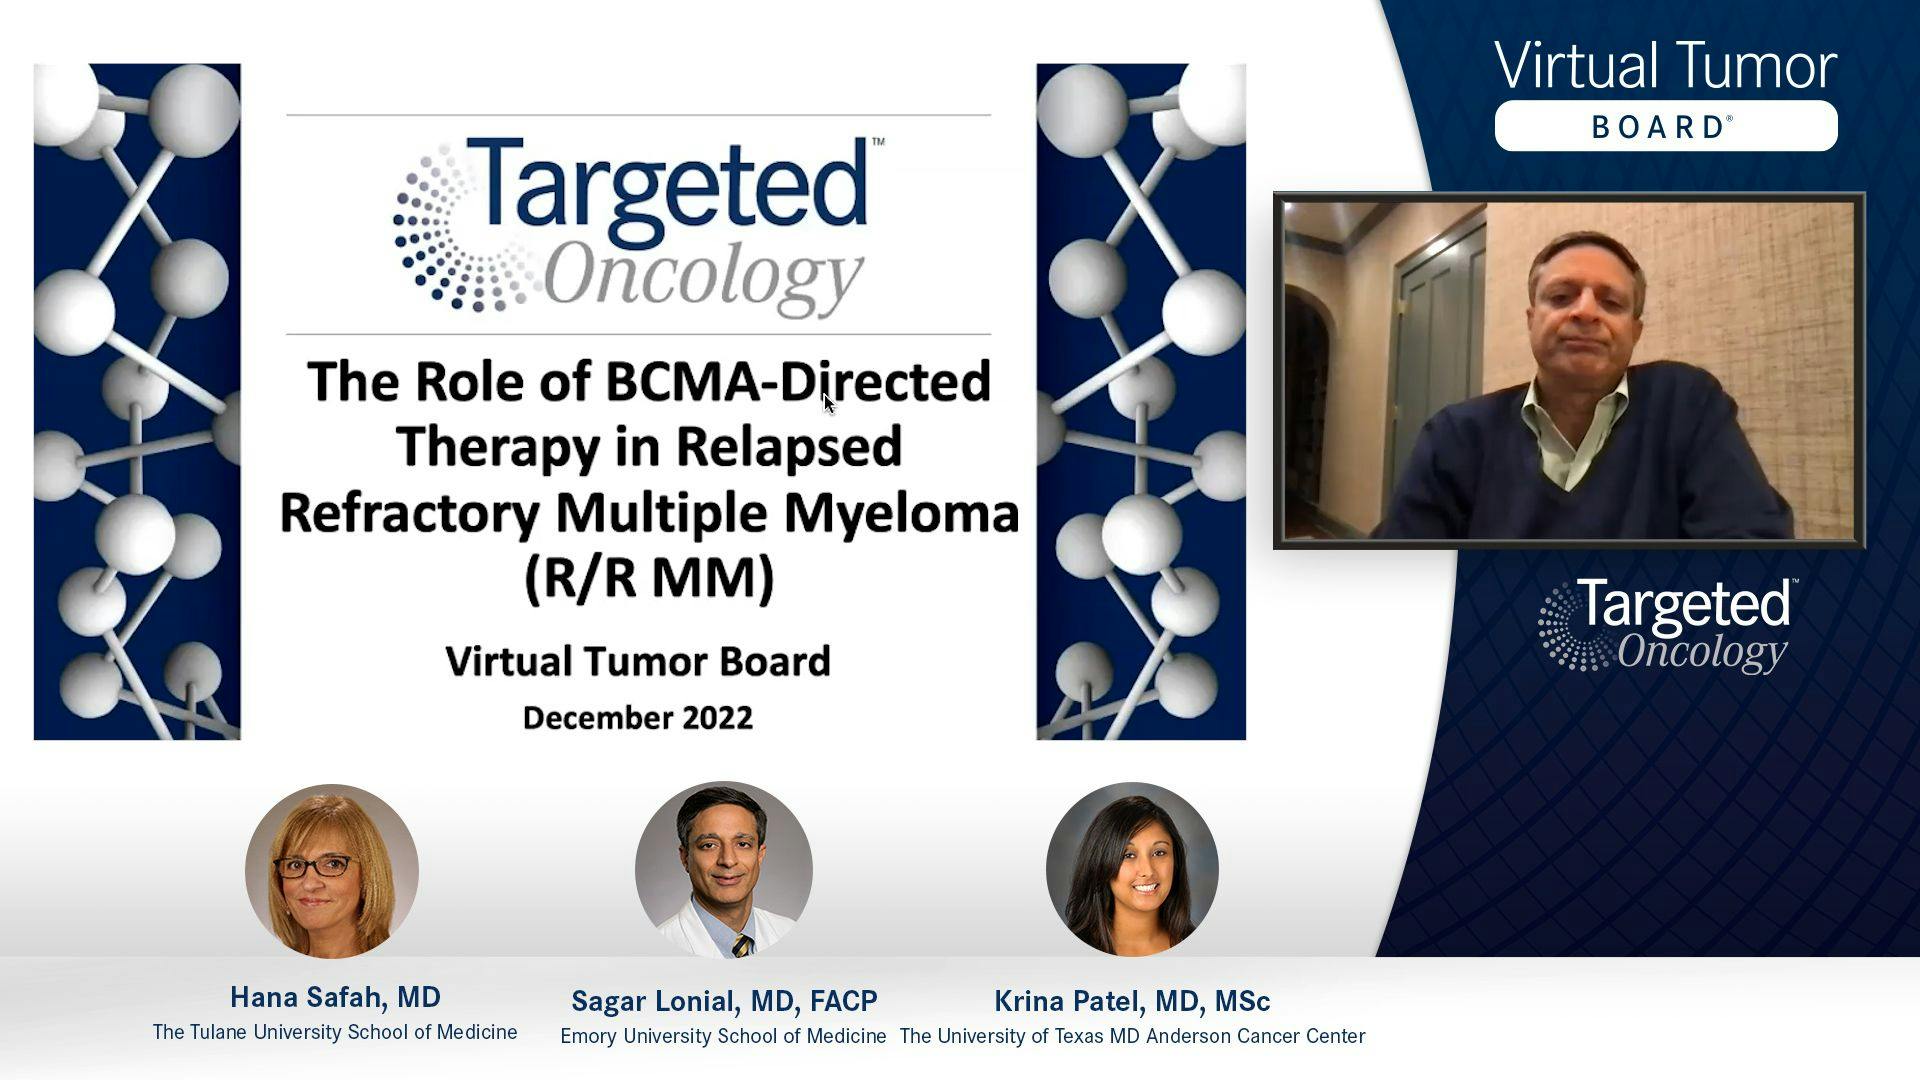 Treatment Options for Patients with Relapsed/Refractory Multiple Myeloma (R/R MM)